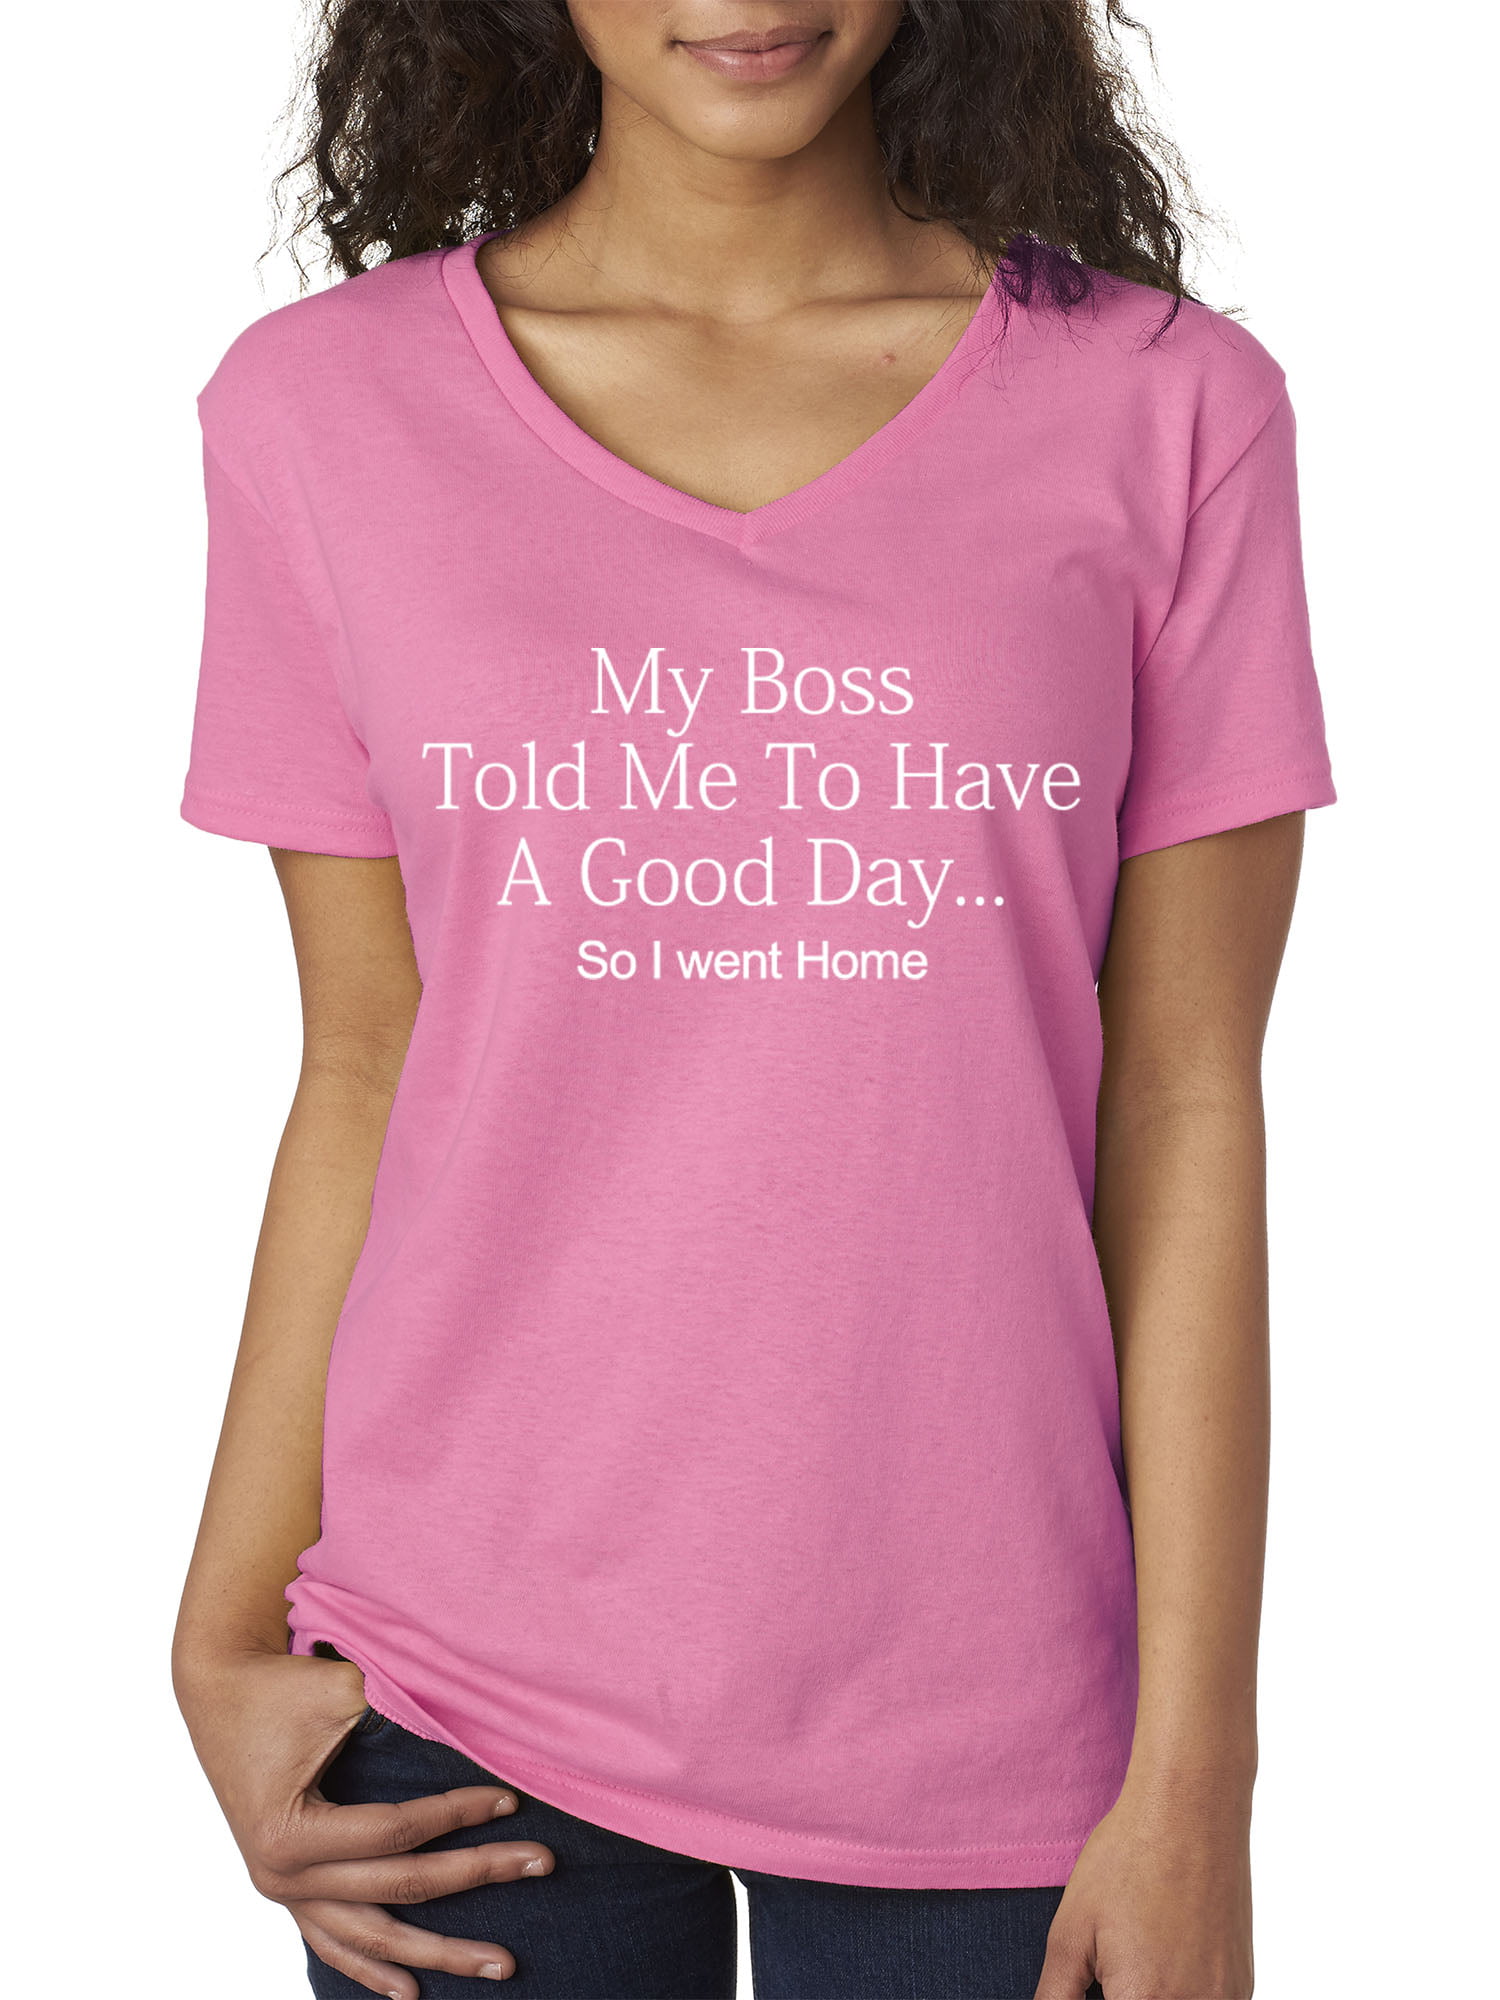 Details about   I Like Big Books Cannot Lie Womens Hot Pink Shirt 